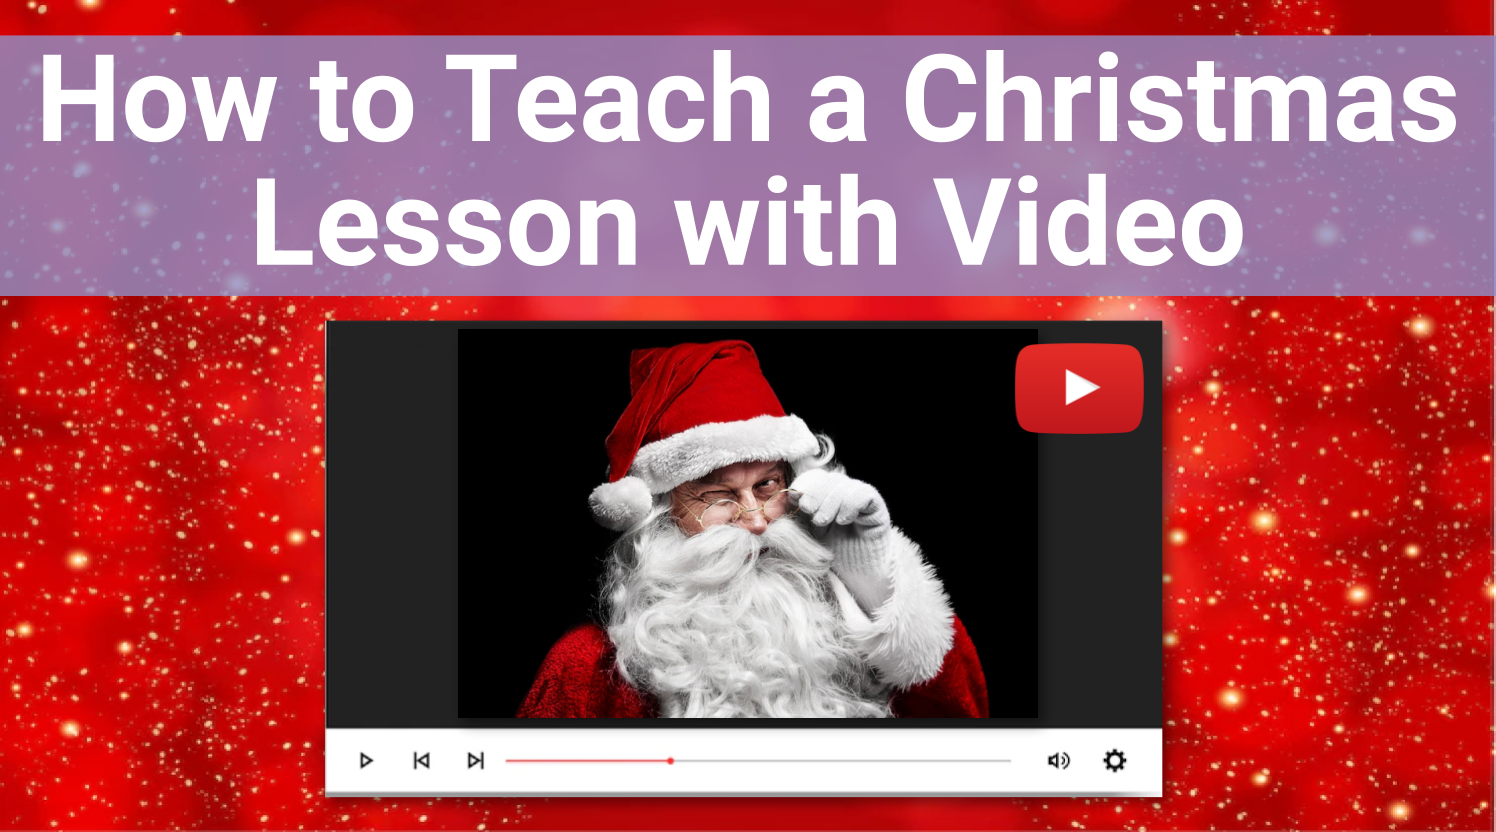 How to Teach a Christmas Lesson with Video